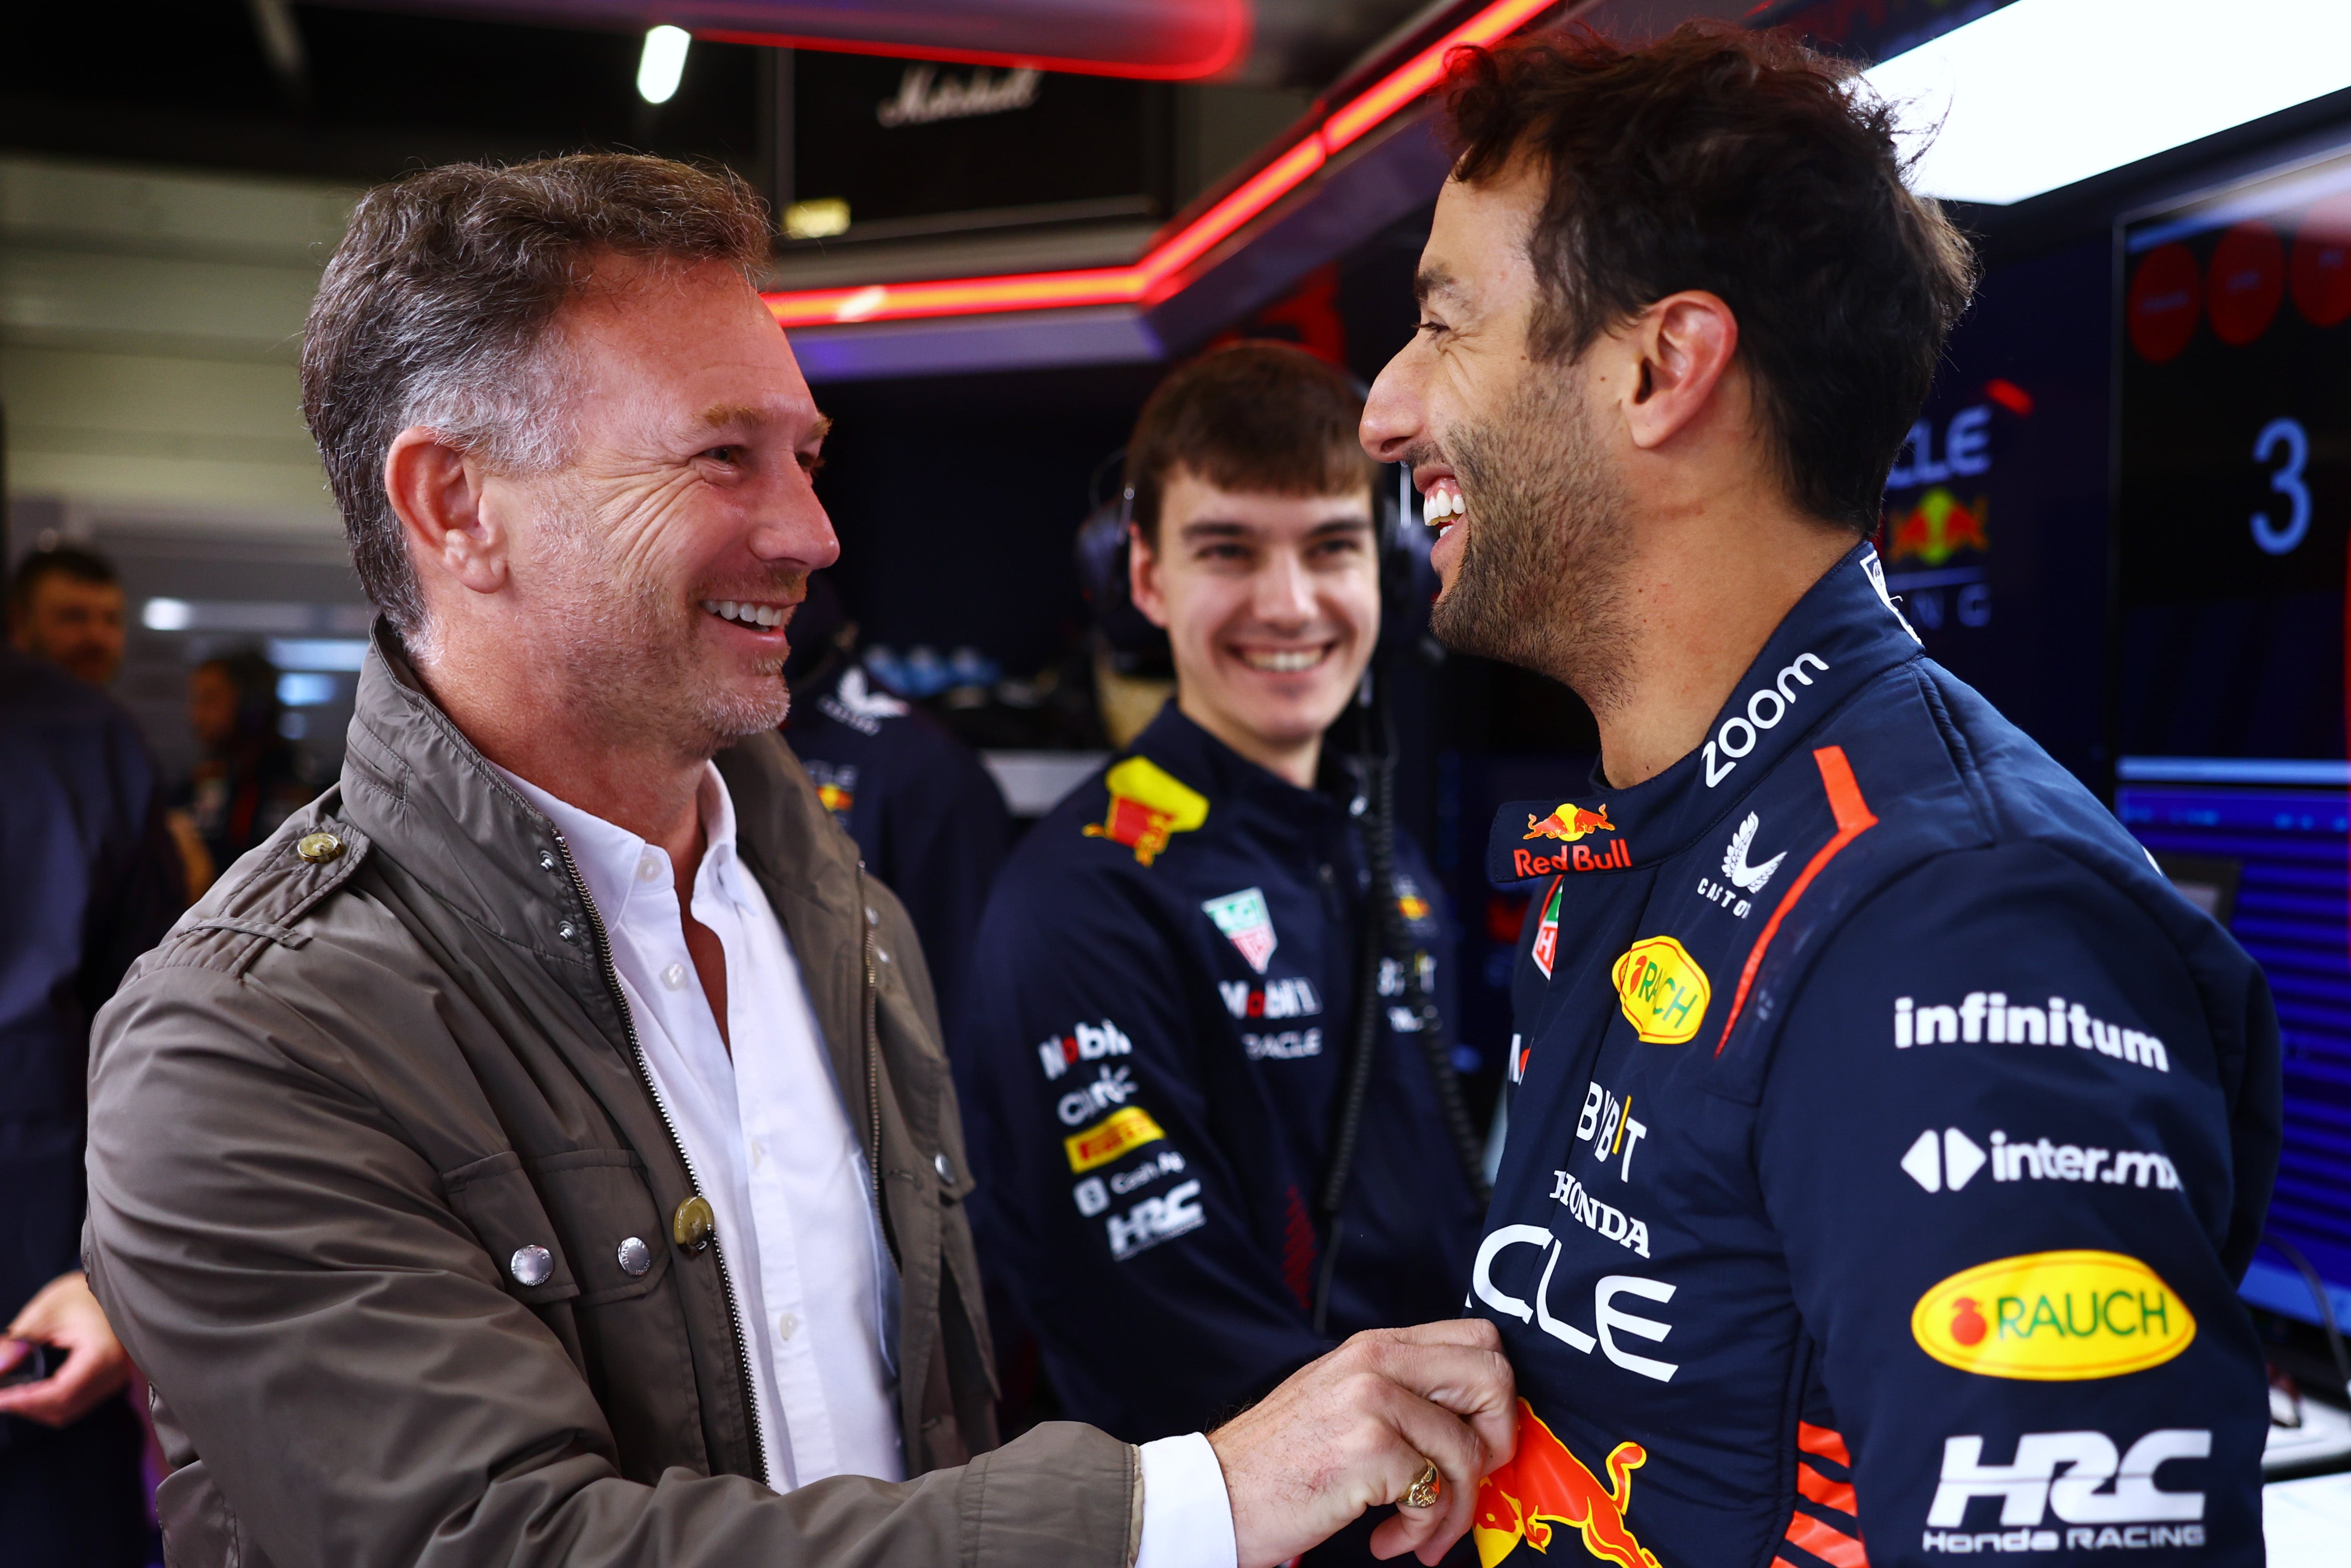 Ricciardo speaks to Christian Horner at last week’s test – hours later he was back on the grid